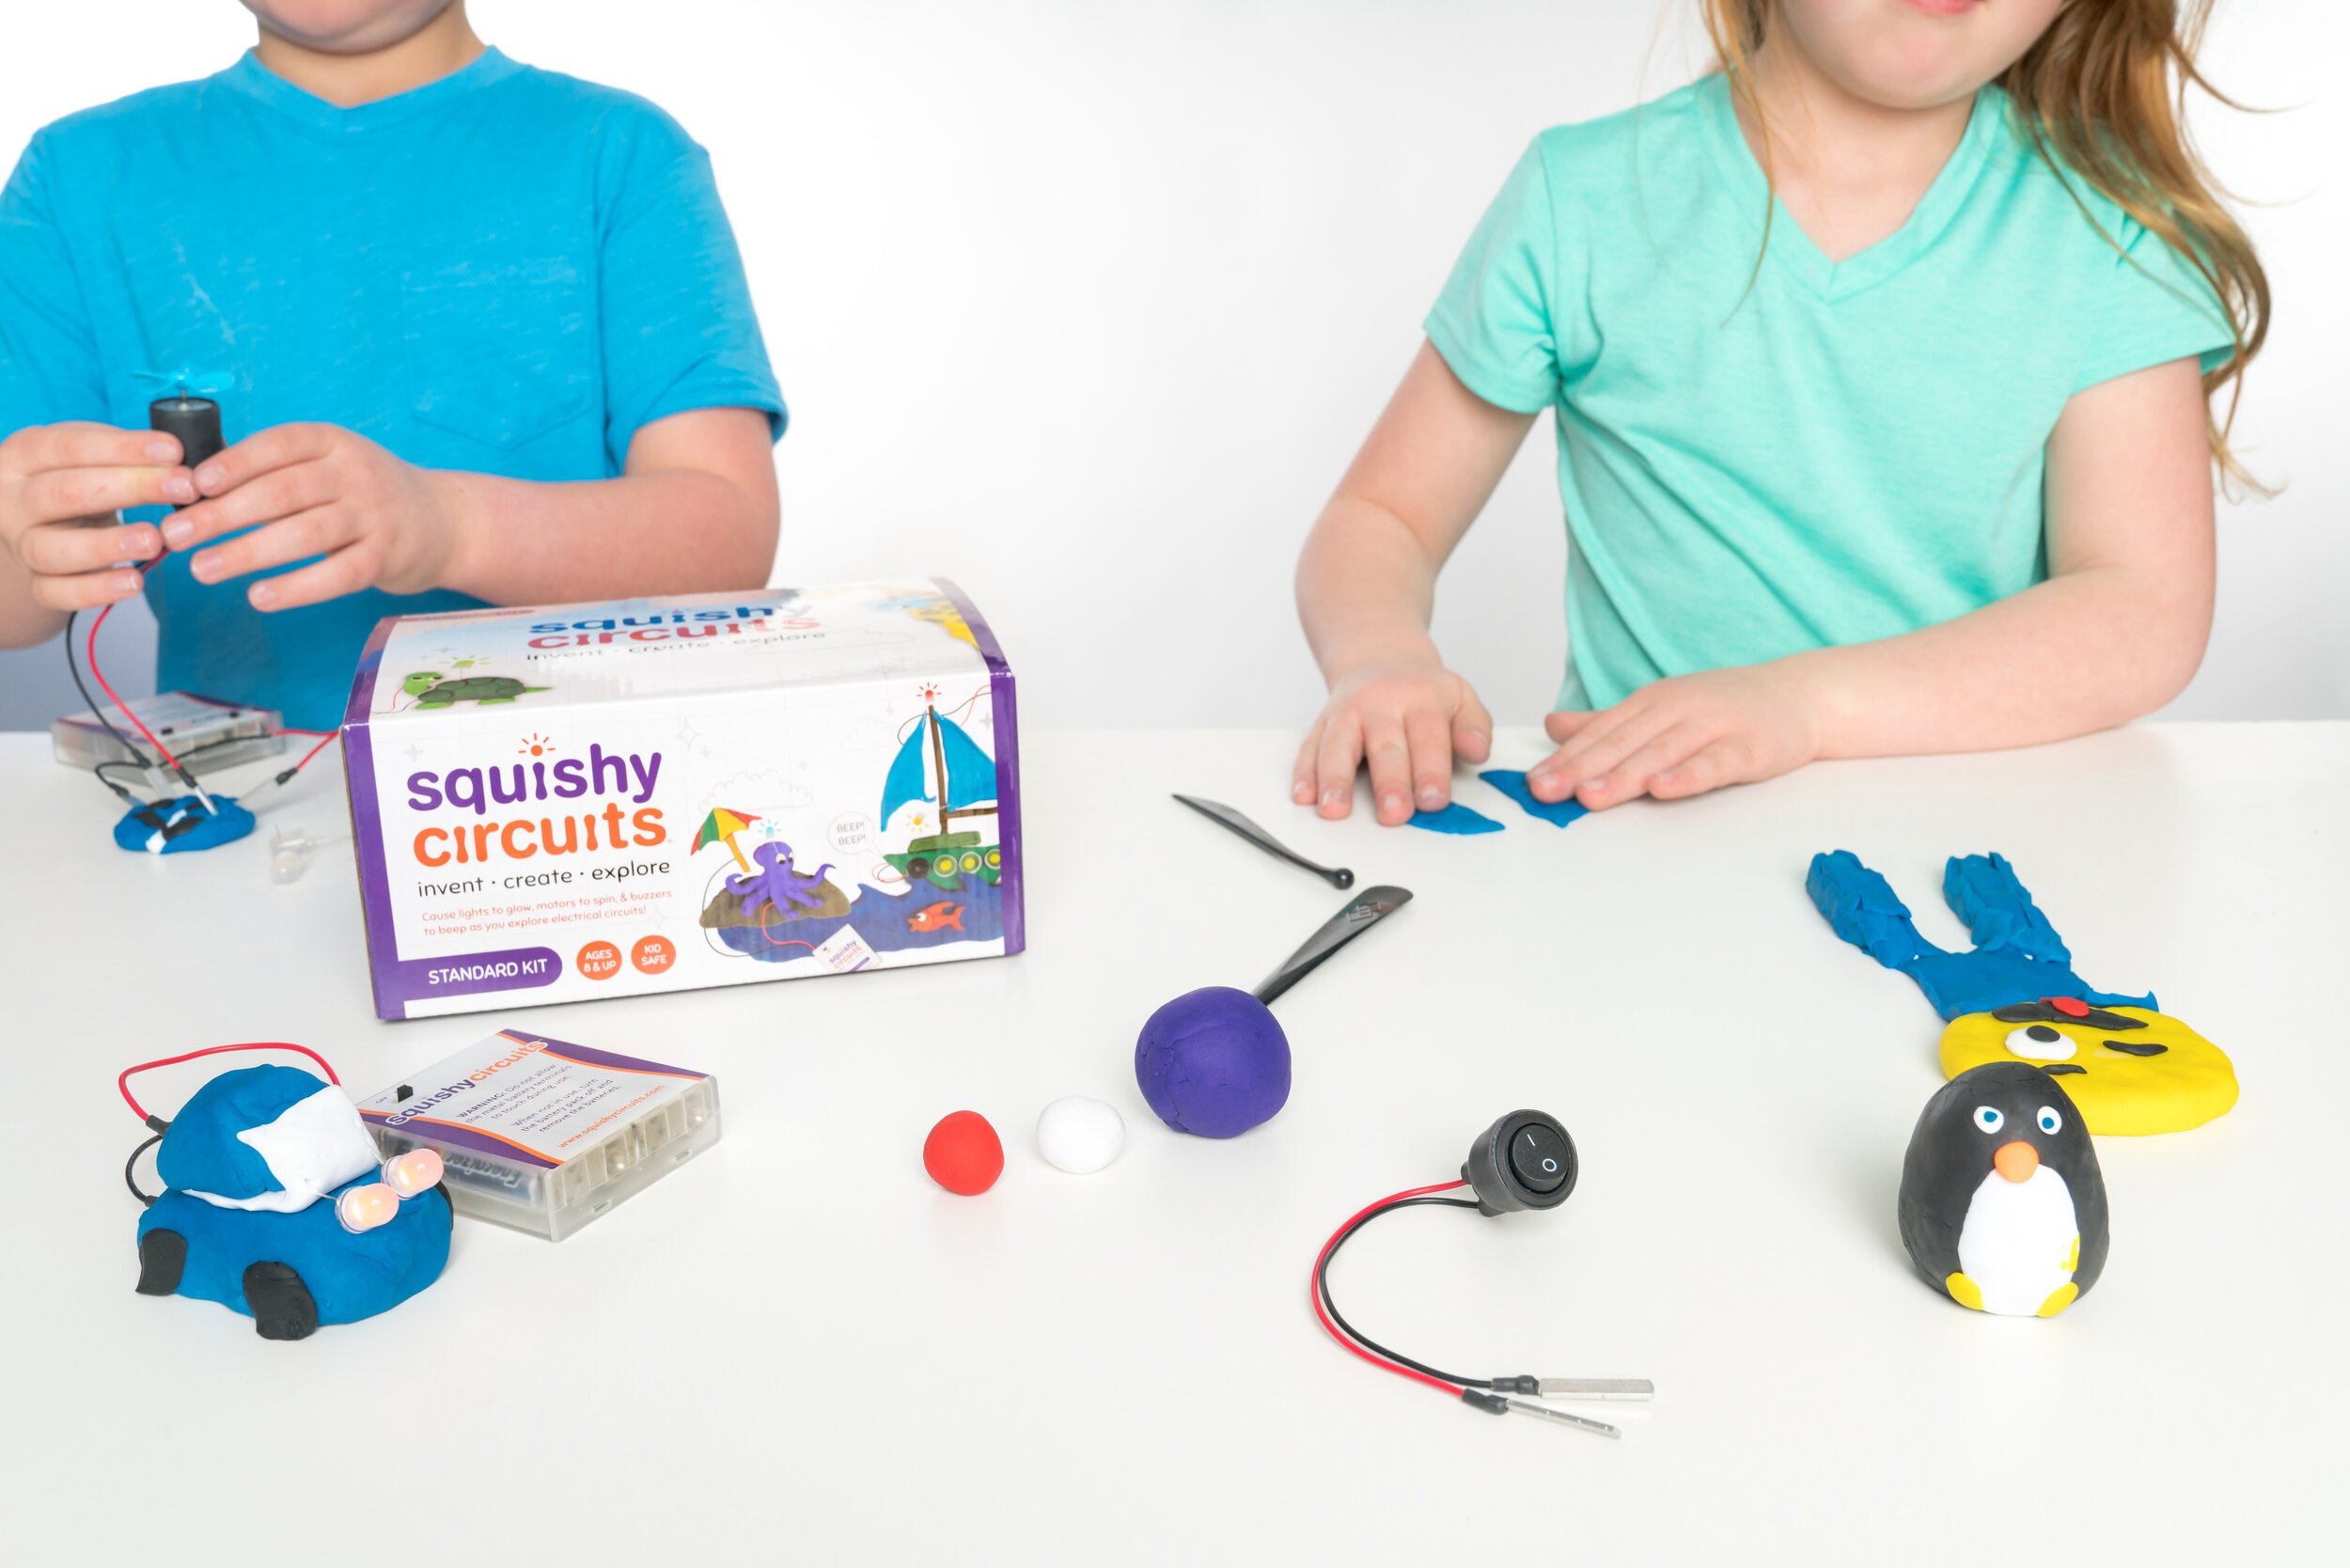 22436_Squishy Circuits_Lifestyle Products (1).jpg